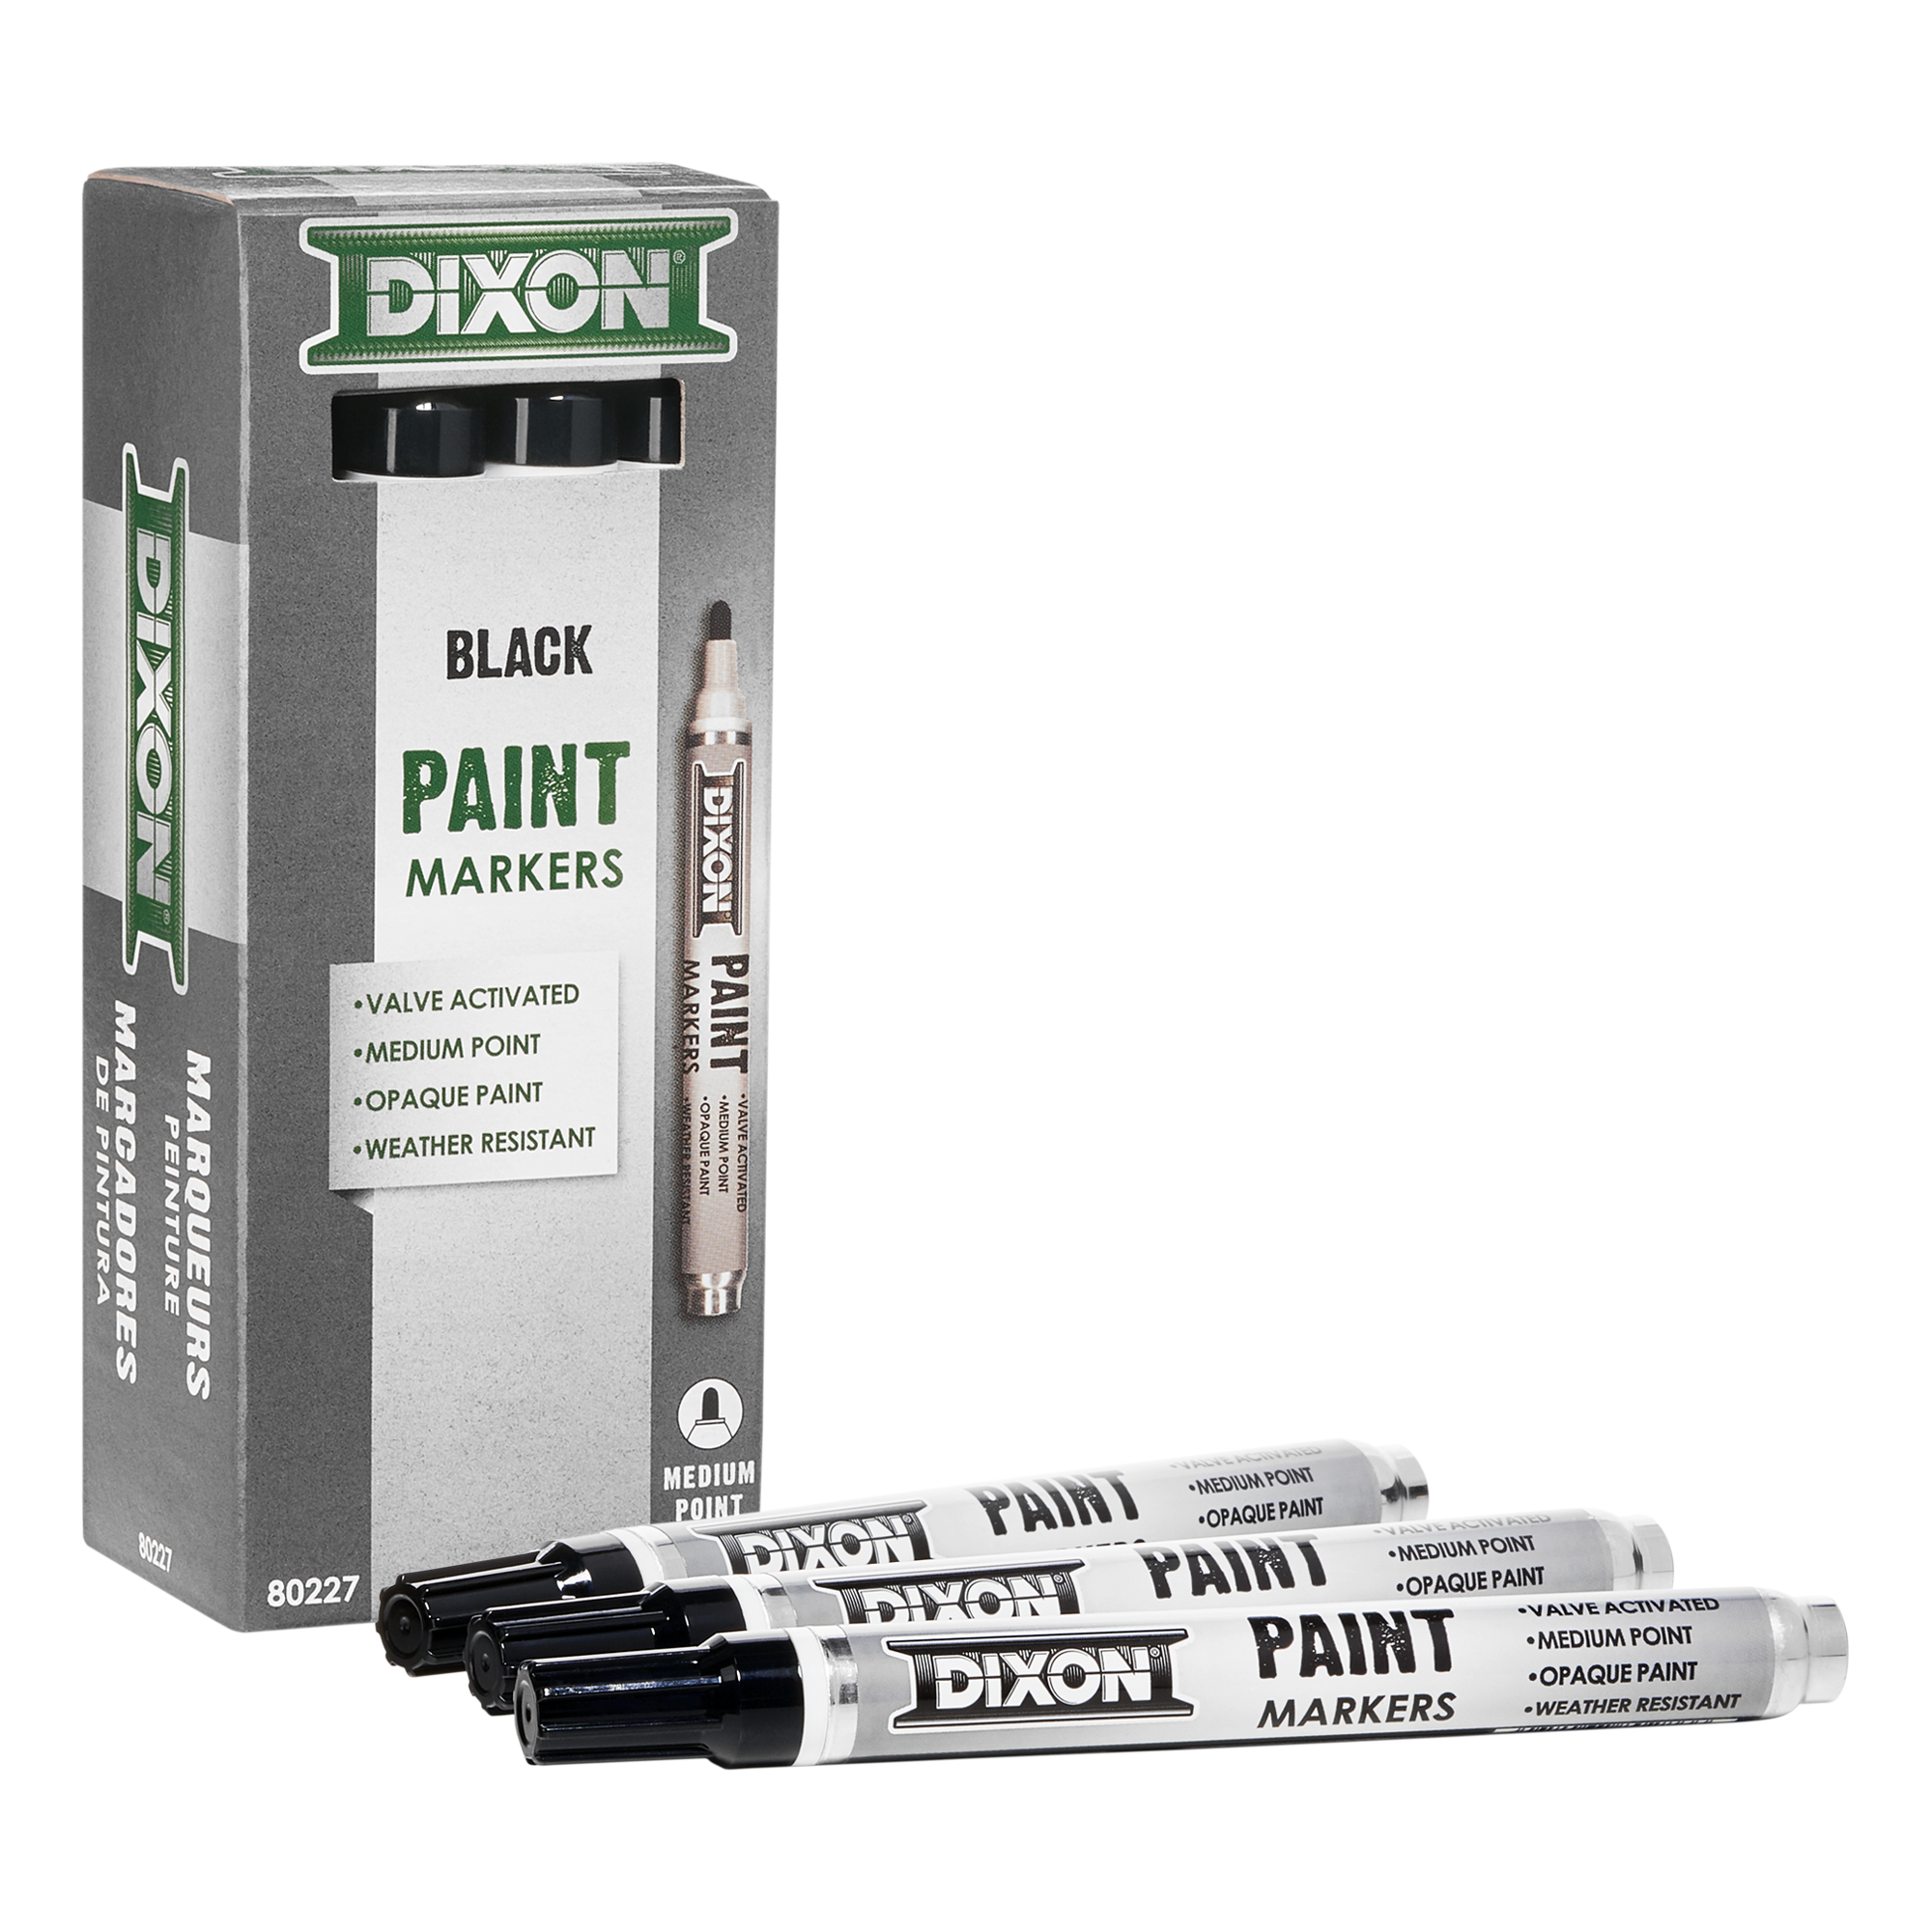 Dixon Industrial Phano China Markers, Black, 12 Count